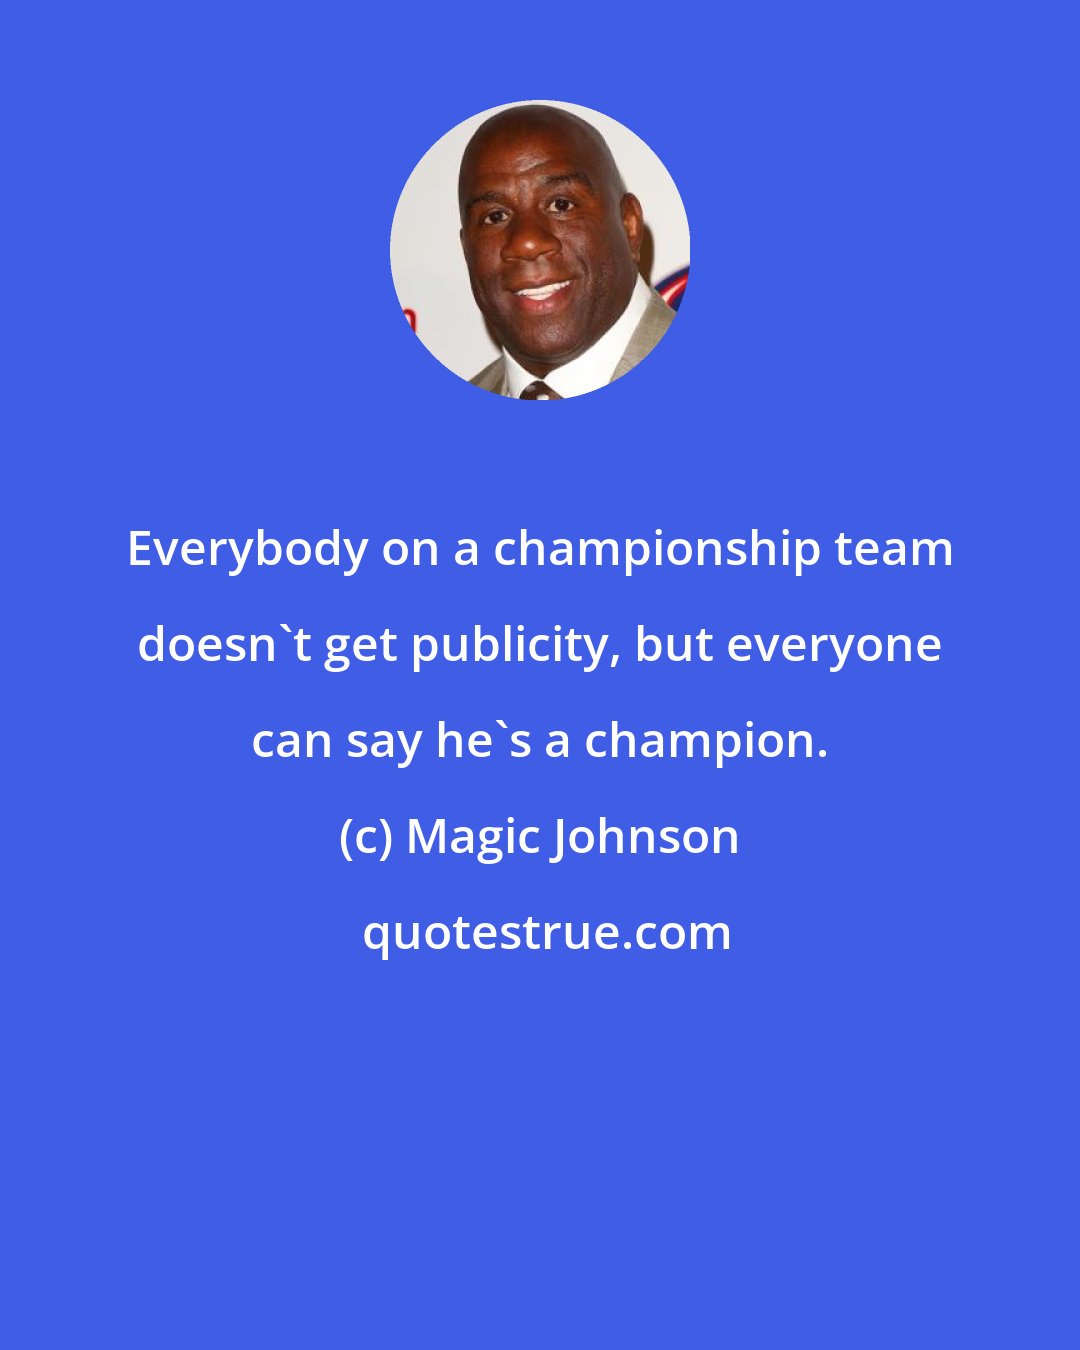 Magic Johnson: Everybody on a championship team doesn't get publicity, but everyone can say he's a champion.